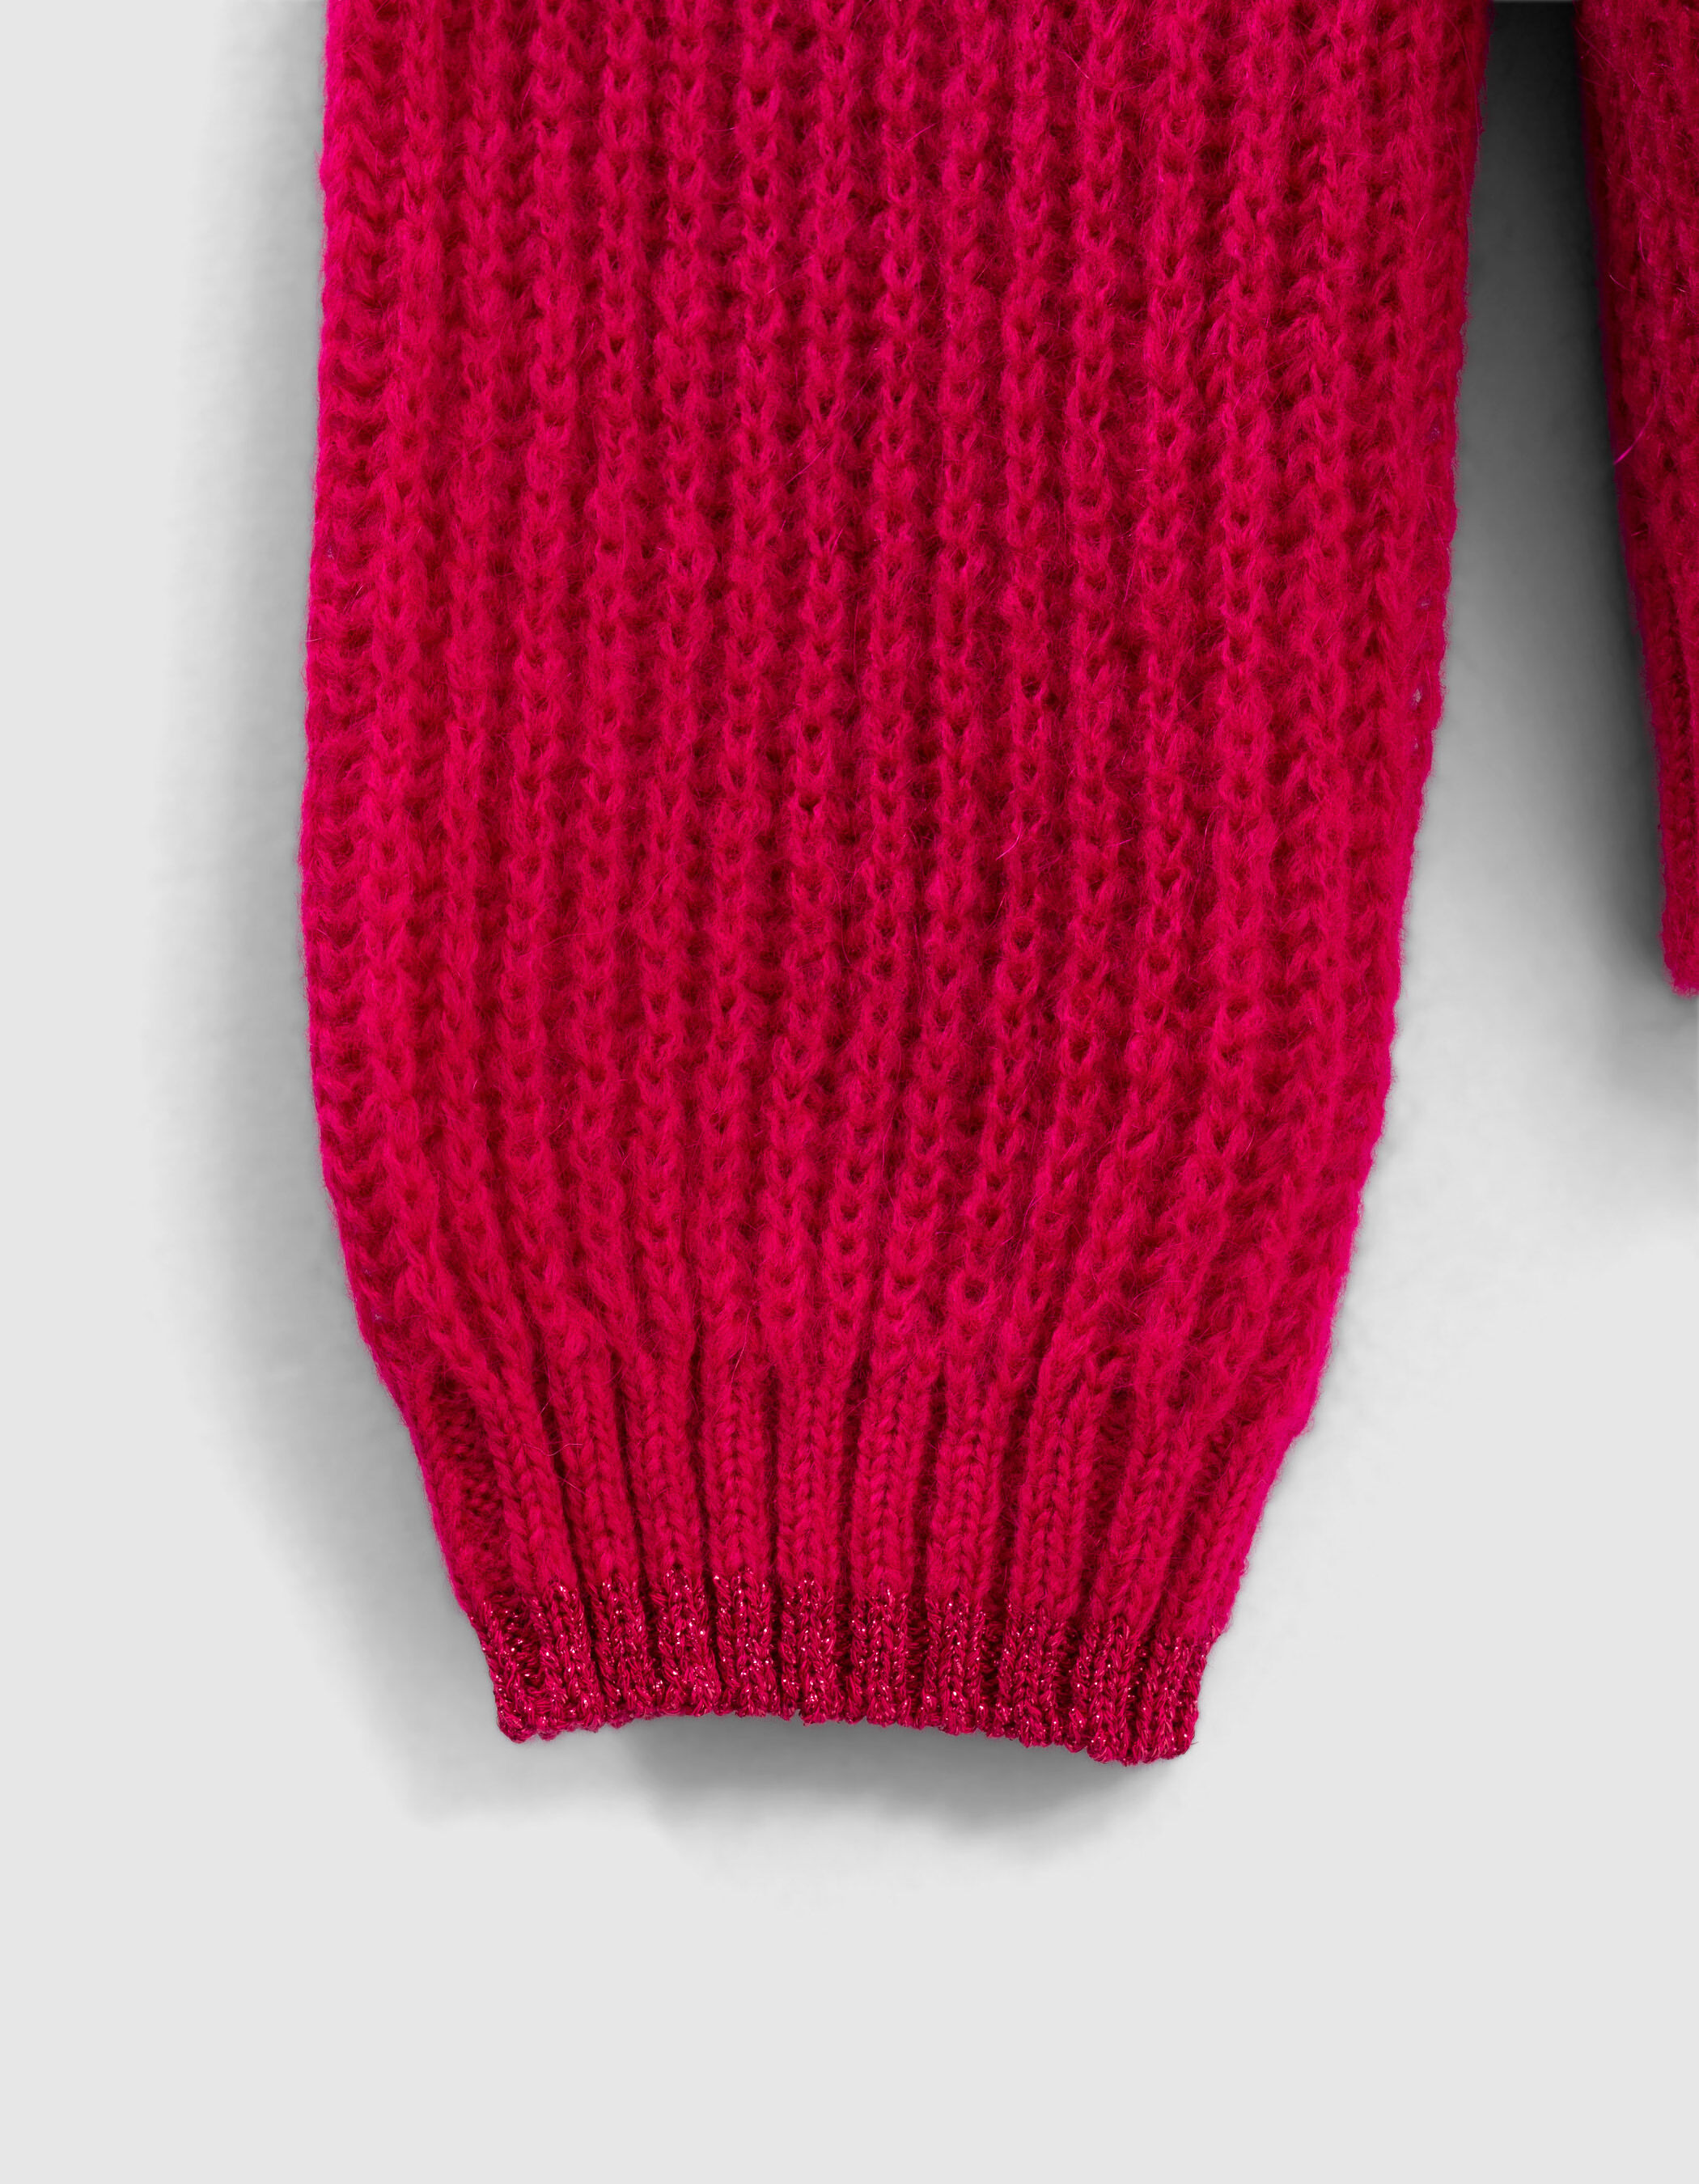 Women's pink ribbed knit sweater with lurex details